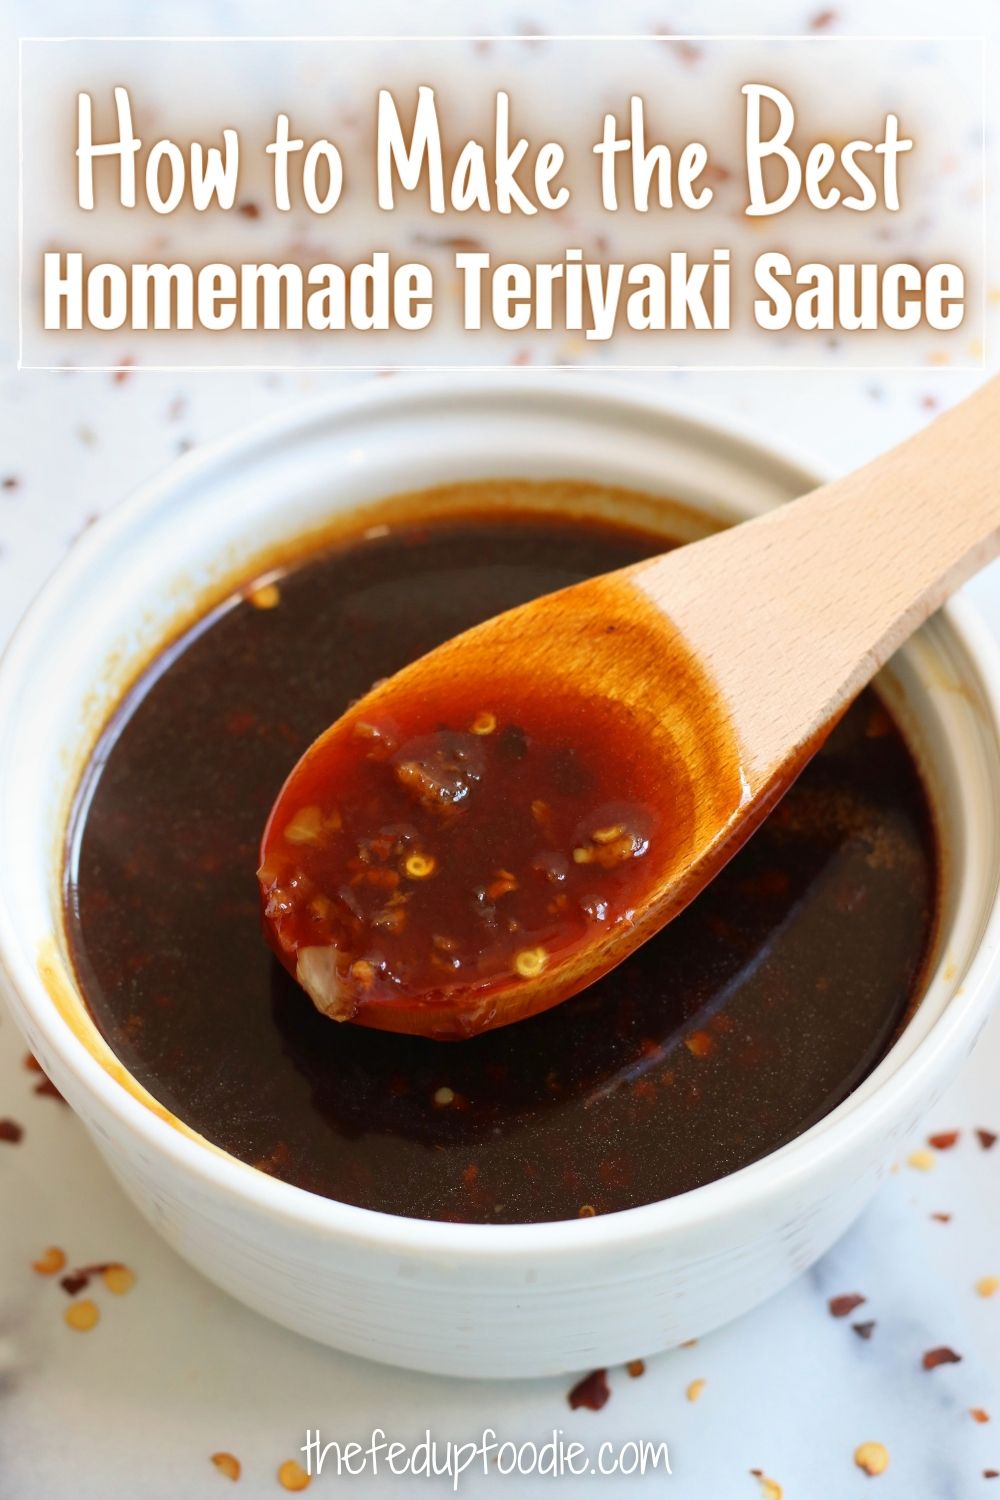 Homemade Teriyaki Sauce recipe made with soy sauce, brown sugar, garlic and ginger. This easy and healthy sauce is wonderful for chicken, salmon, noodles, veggies, stir fry and kabobs. 
#TeriyakiSauce #TeriyakiSauceRecipe ##TeriyakiSauceEasy #TeriyakiSauceChicken #TeriyakiSauceForSalmon #SimpleTeriyakiSauce #BestTeriyakiSauce #QuickTeriyakiSauce 